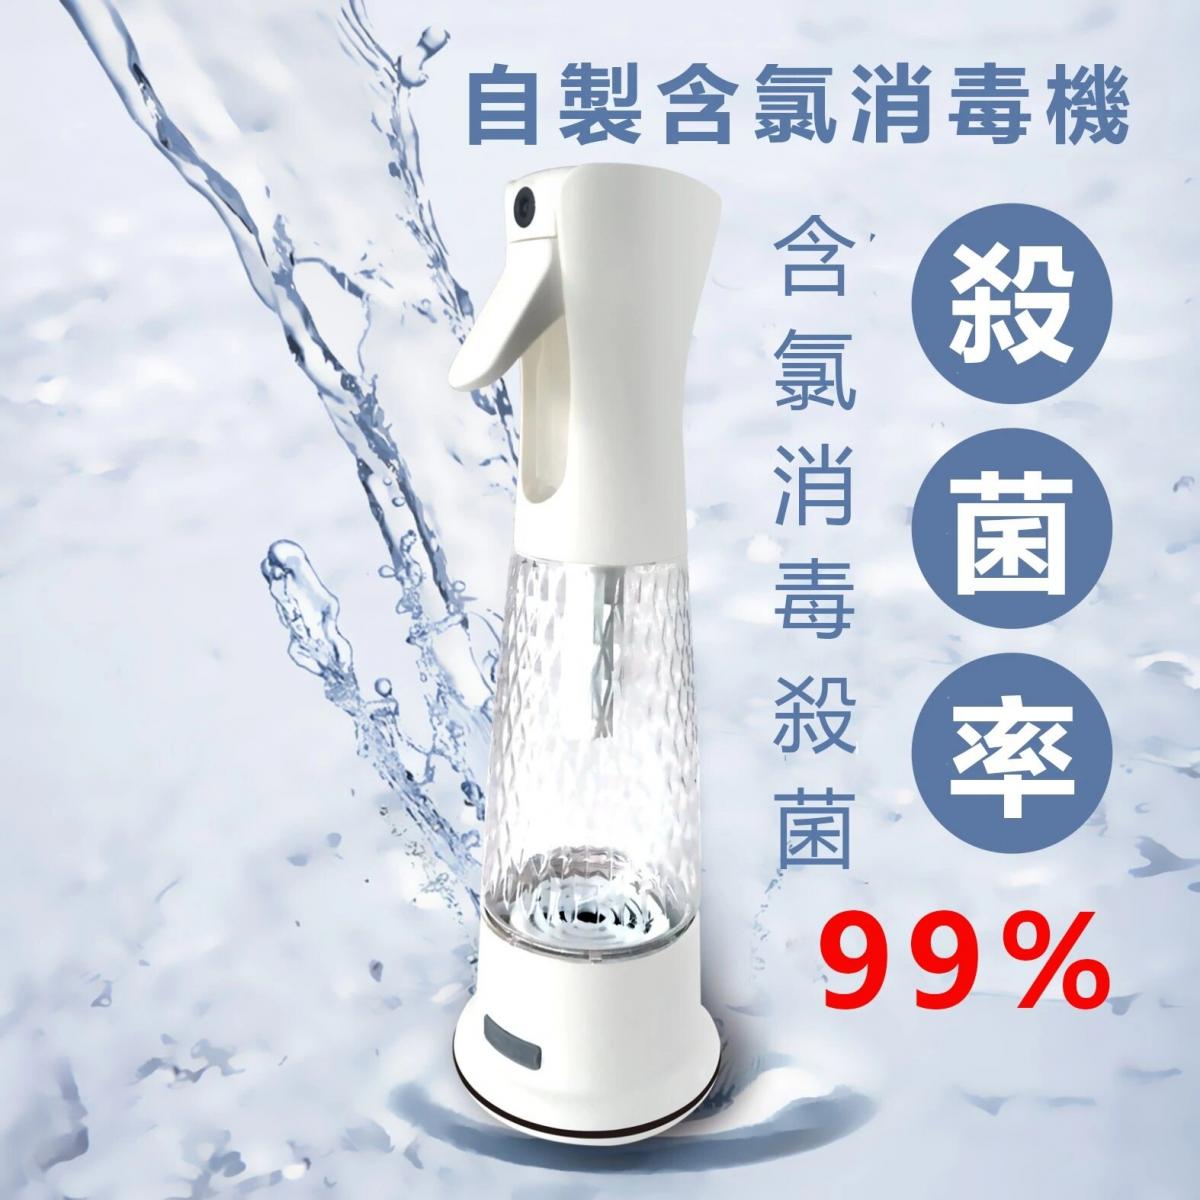 Double Clean - Electrolytic Portable Disinfectant Water Making Machine | Hypochlorous Acid Water | Natural Disinfectant Water | Home Disinfection | Antibacterial Spray AB-X7C